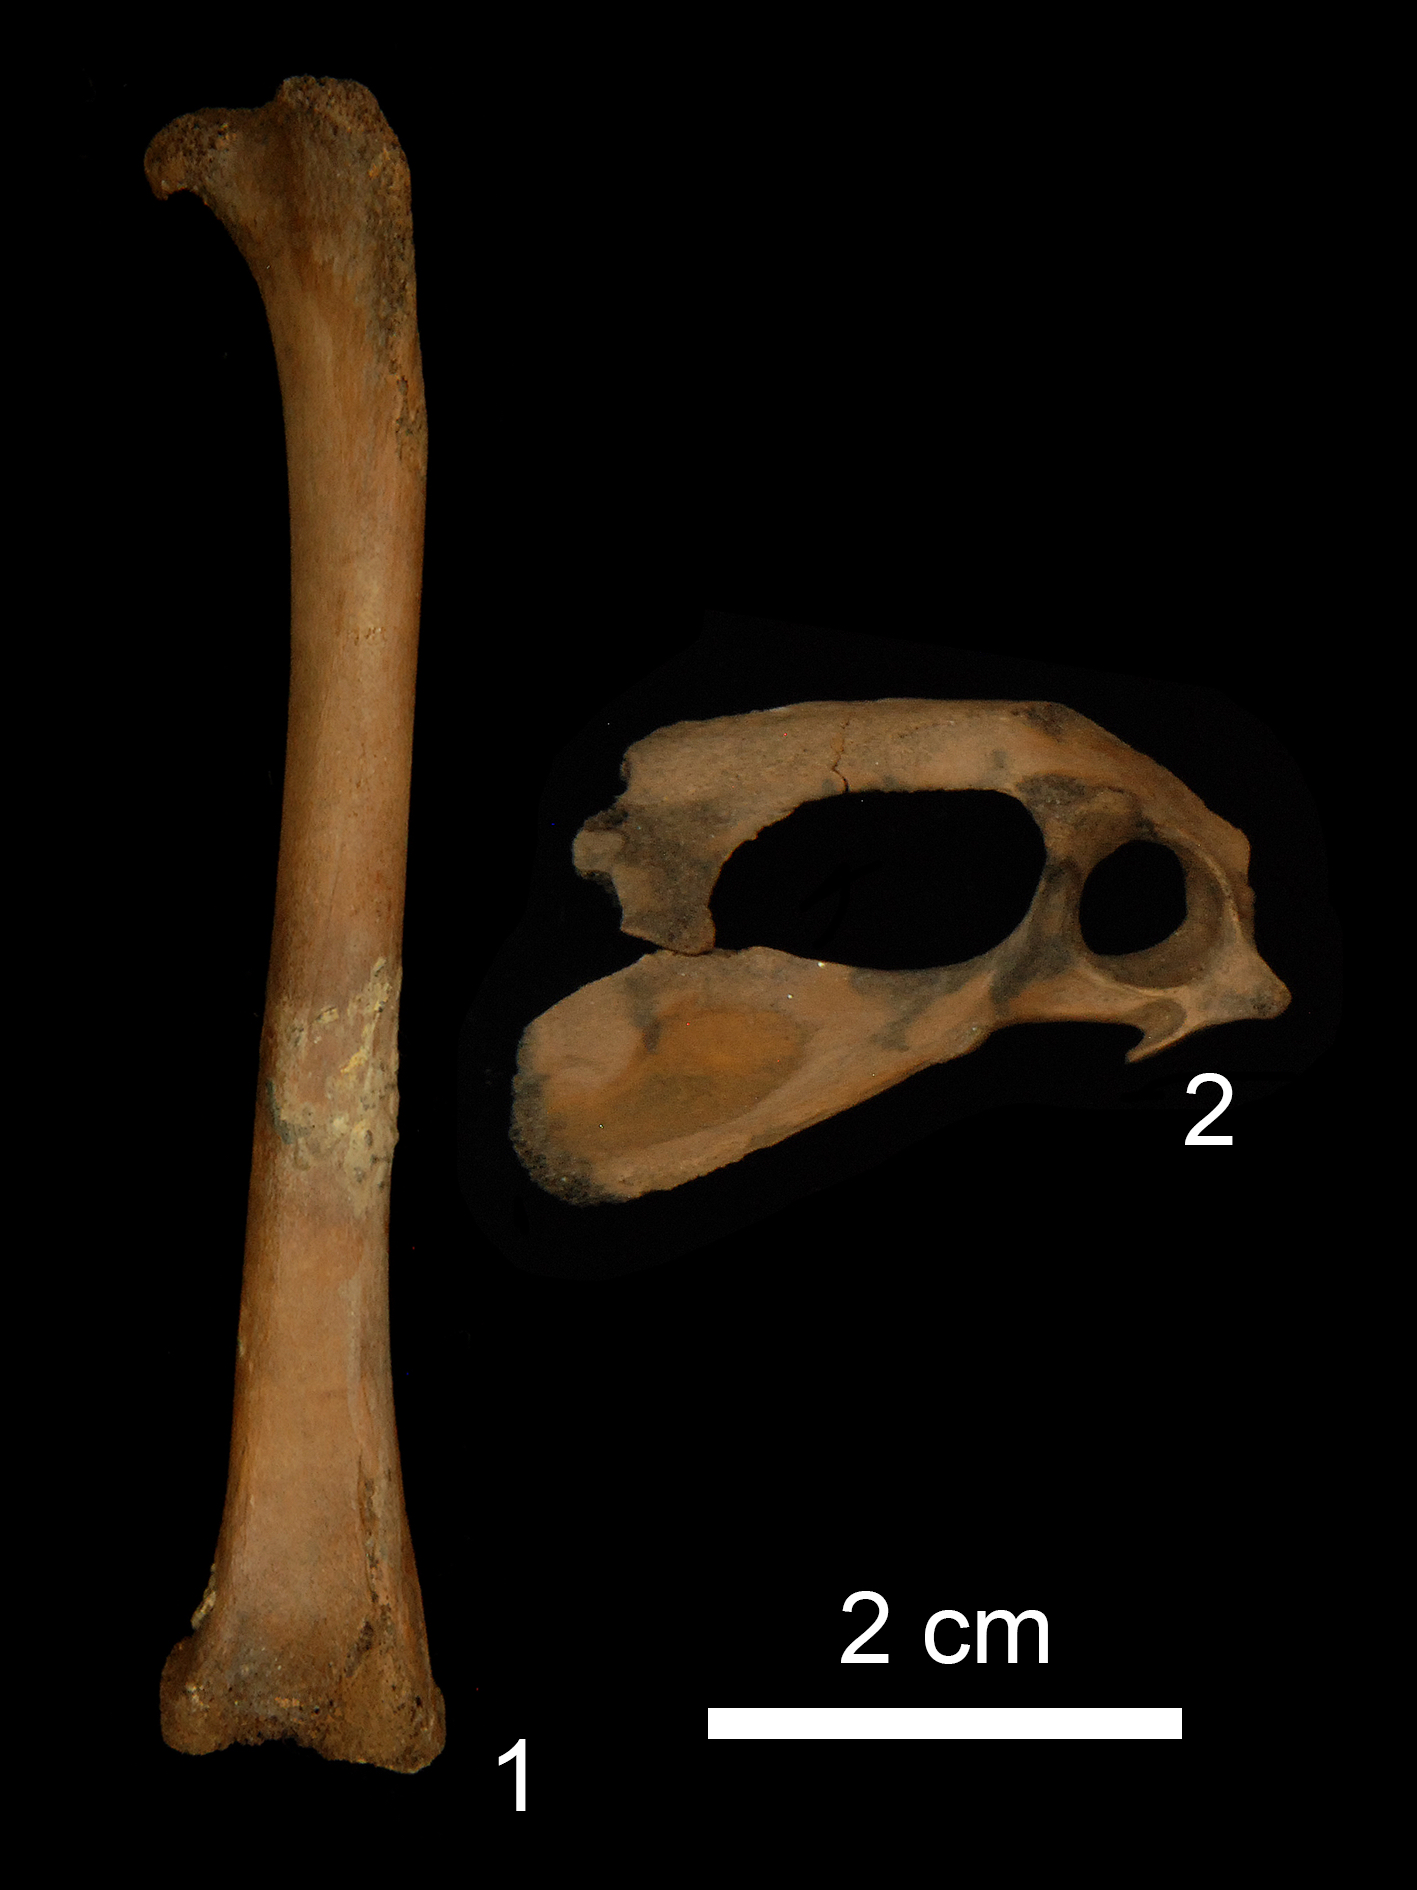 The two bones from the Karako-Kagi site identified as belonging to juvenile chickens by the Zooarchaeology by Mass Spectrometry technique (Masaki Eda, et al. Frontiers in Earth Science. April 20, 2023).